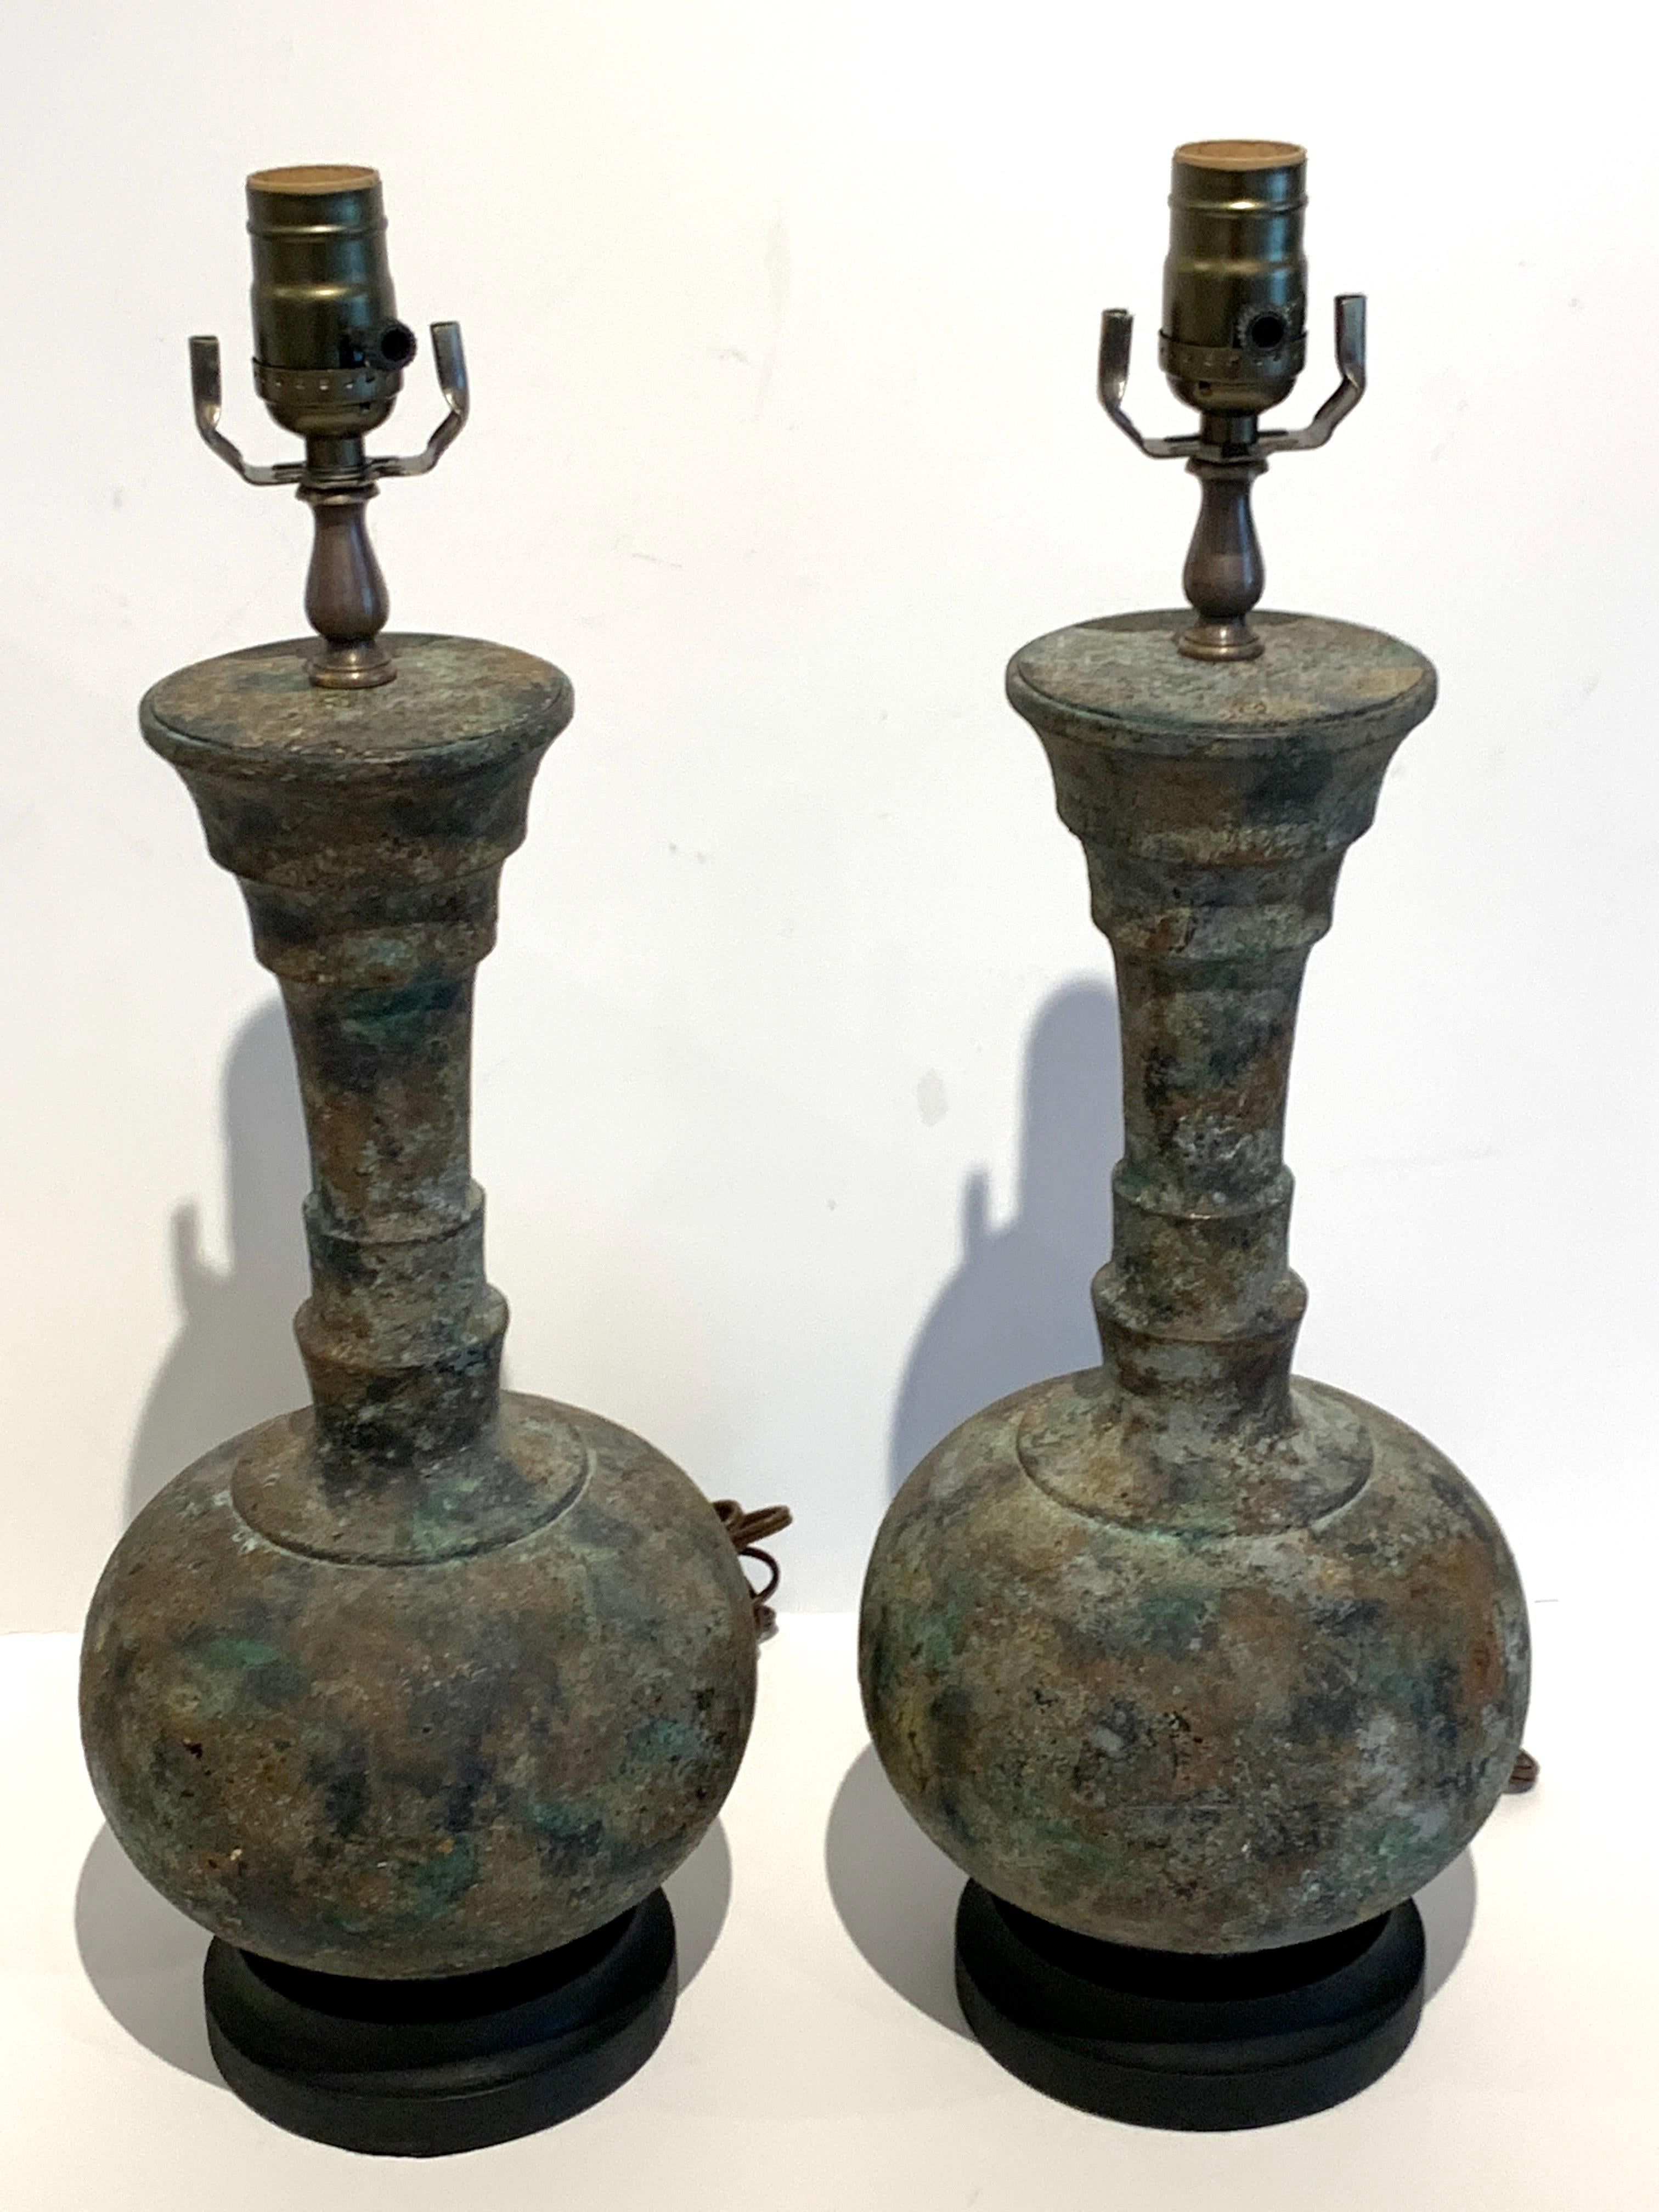 Pair of modern French acid washed bronze lamps, each one standing 21